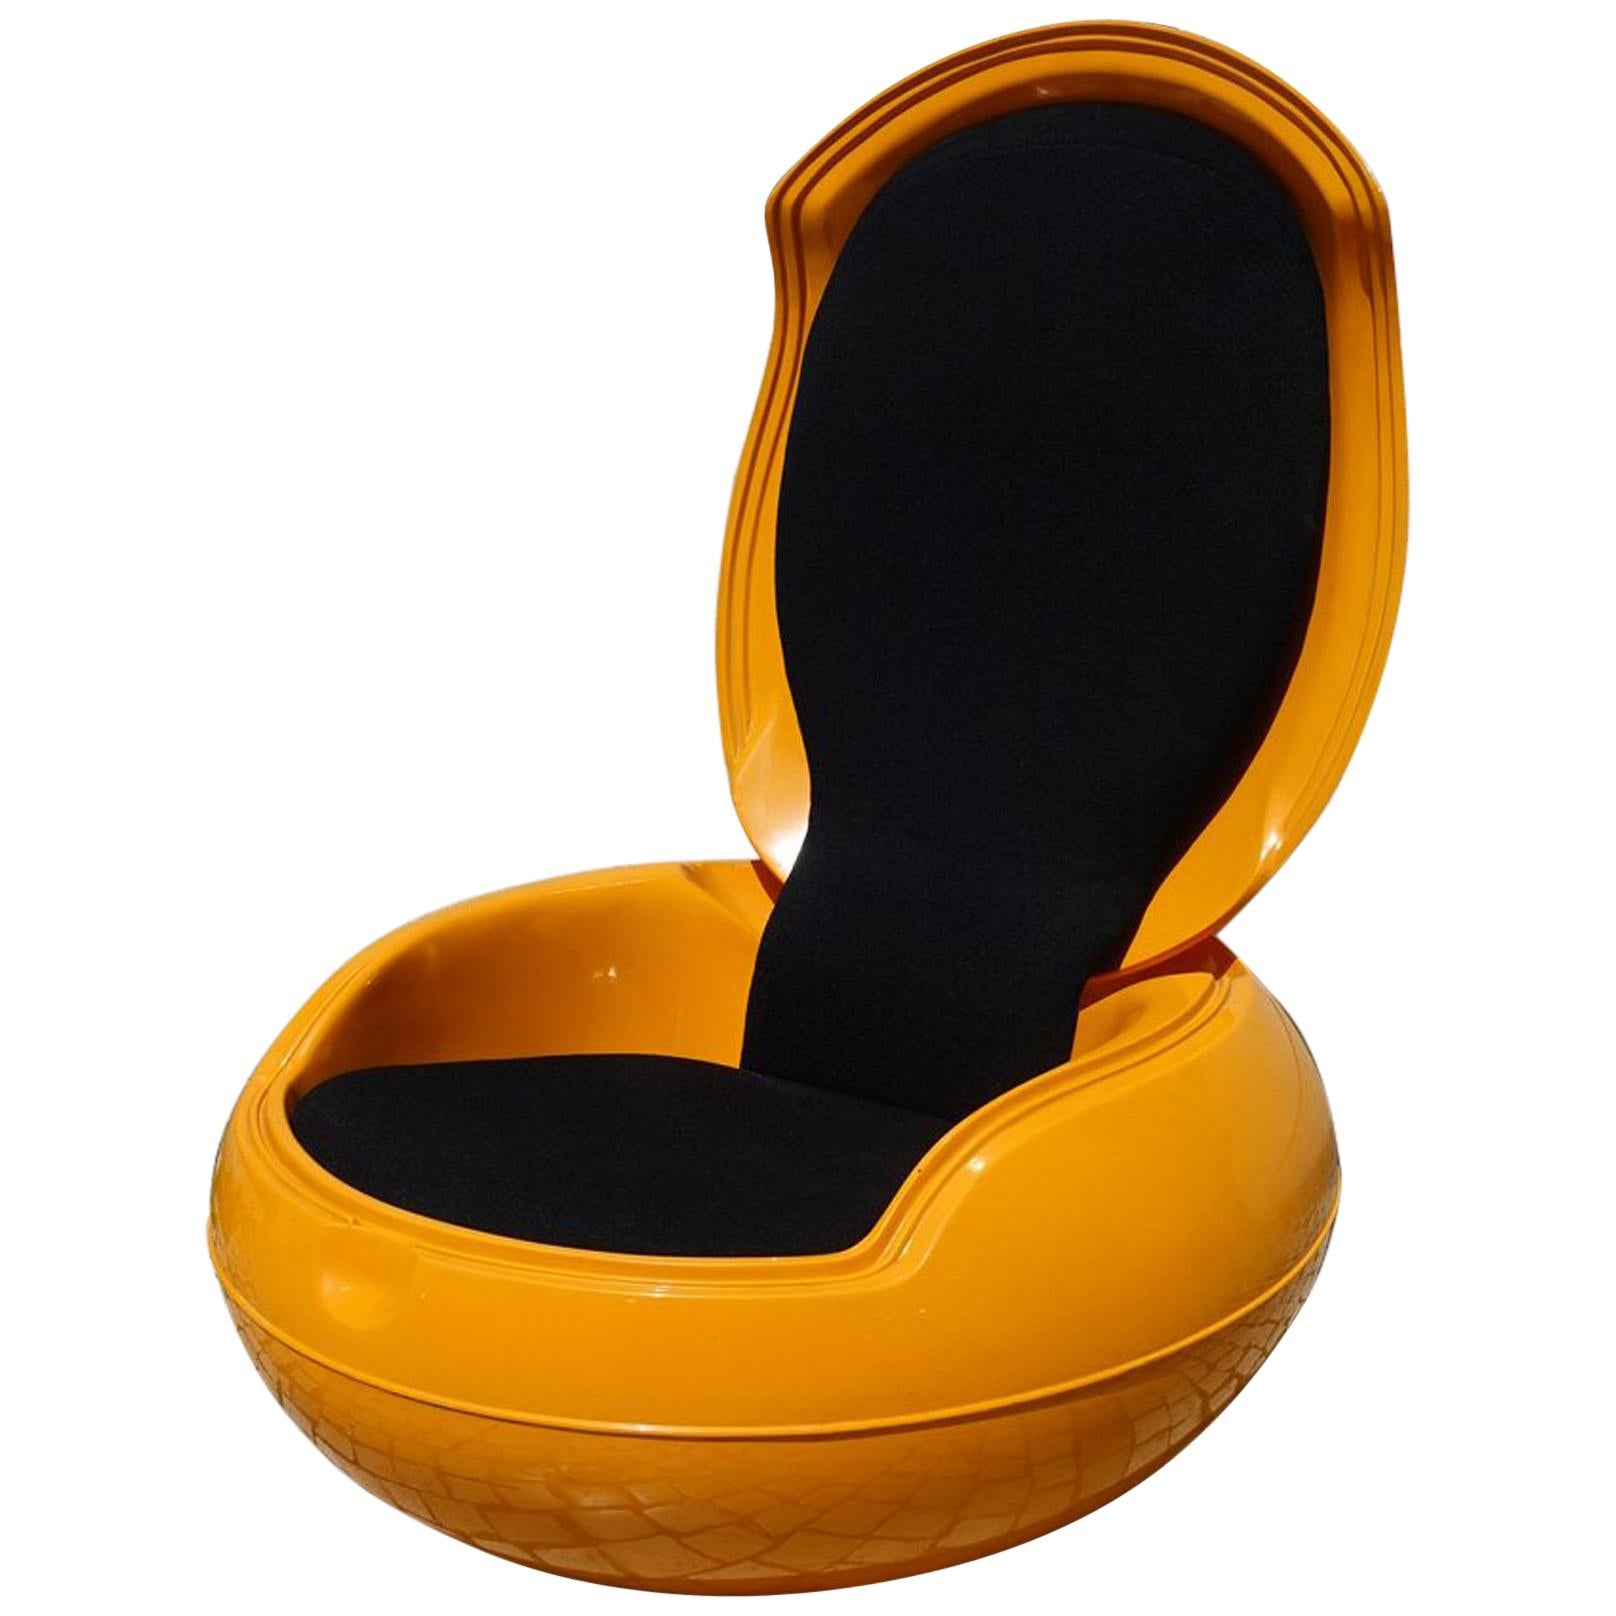 Modernist Yellow Garden Egg Chair or Senftenberg Egg by Peter Ghyczy, 1968